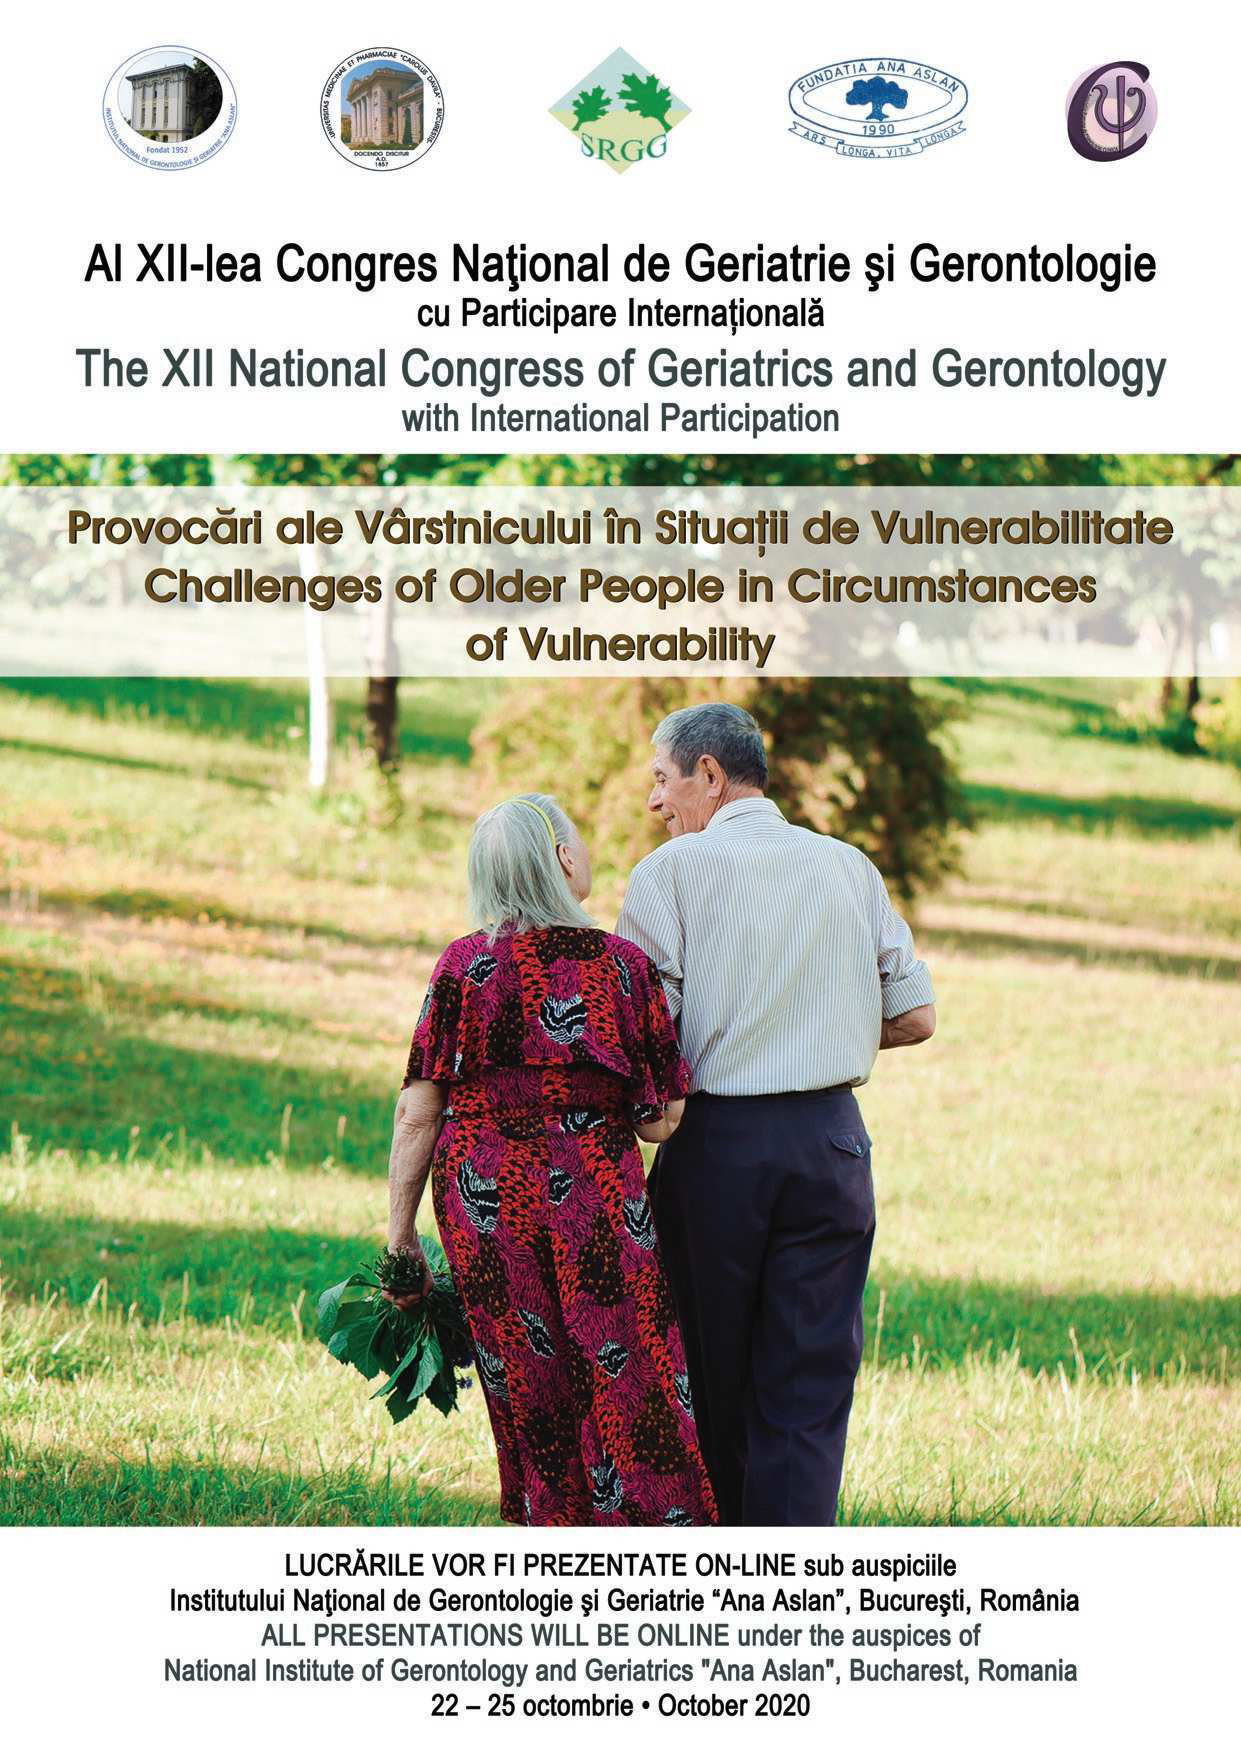 XII TH NATIONAL CONGRESS OF GERIATRICS AND GERONTOLOGY WITH INTERNATIONAL PARTICIPATION